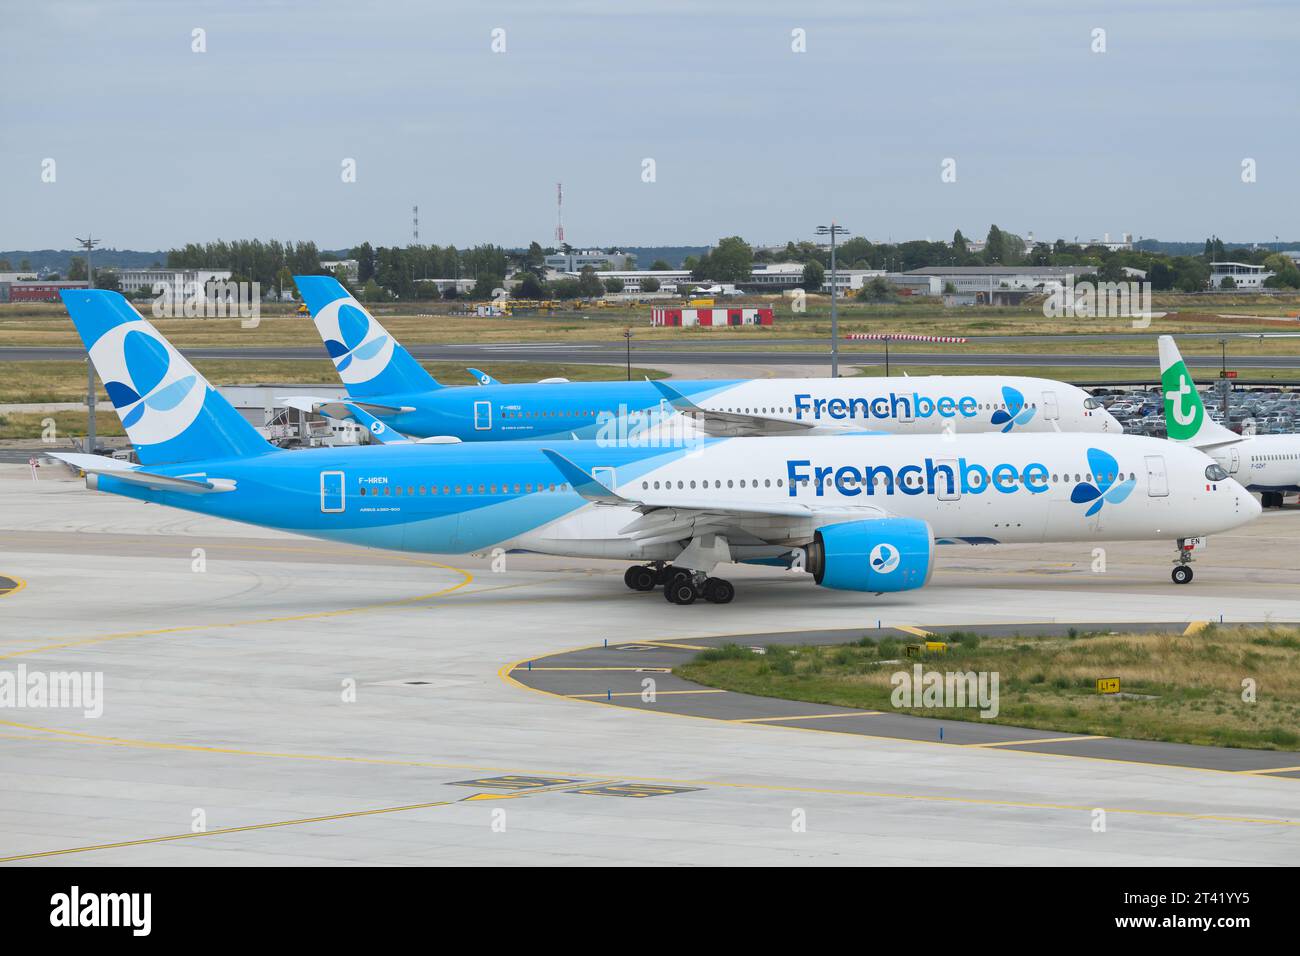 Pair French Bee Airbus A350 airplane at Paris Orly Airport. Aircraft A350-900 of airline FrenchBee from France. Planes of French Bee airlines fleet. Stock Photo